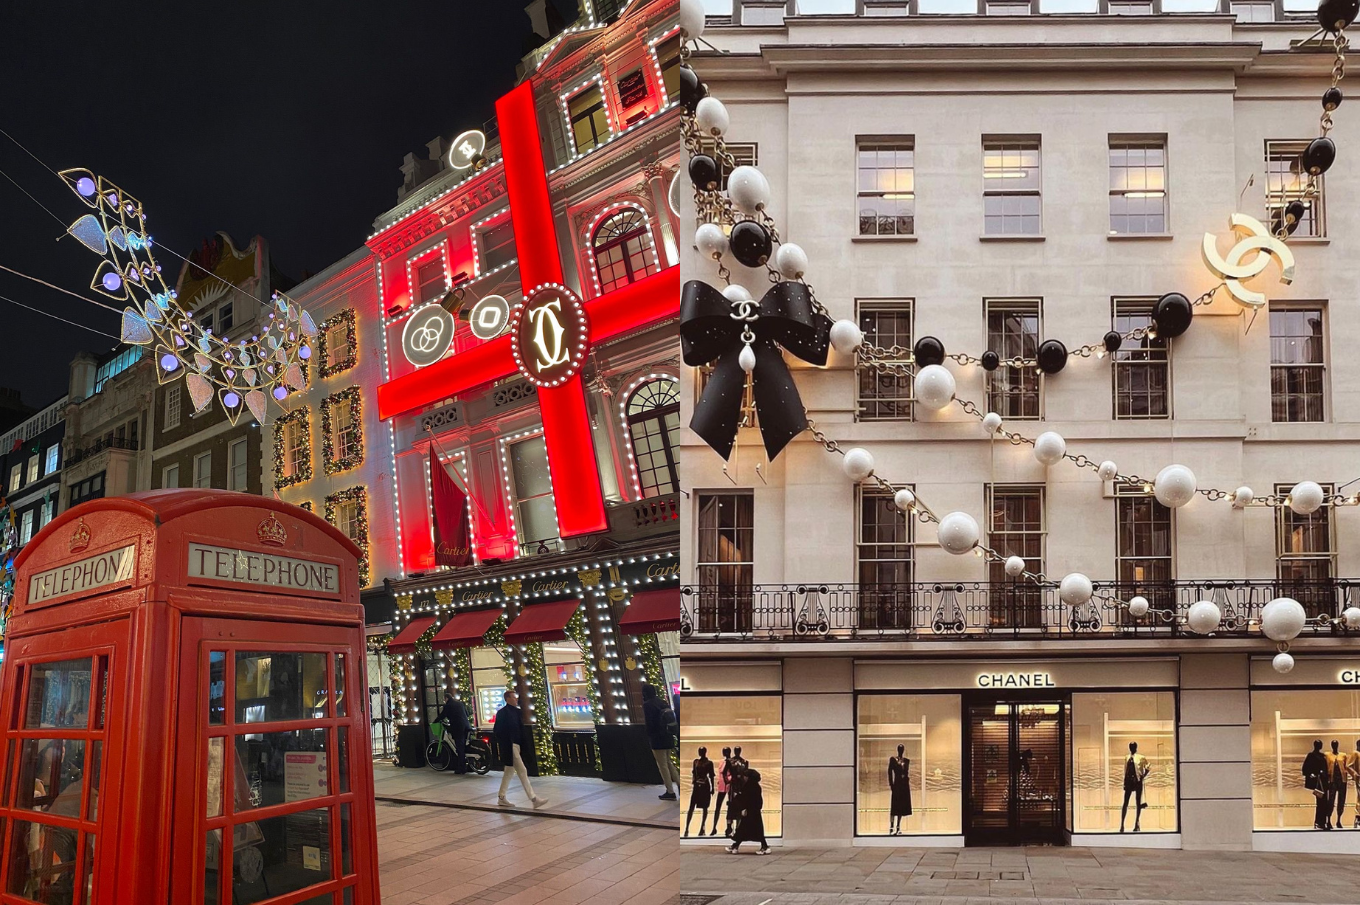 Left photo: London street at night / Right photo: Chanel shop building with Christmas decorations